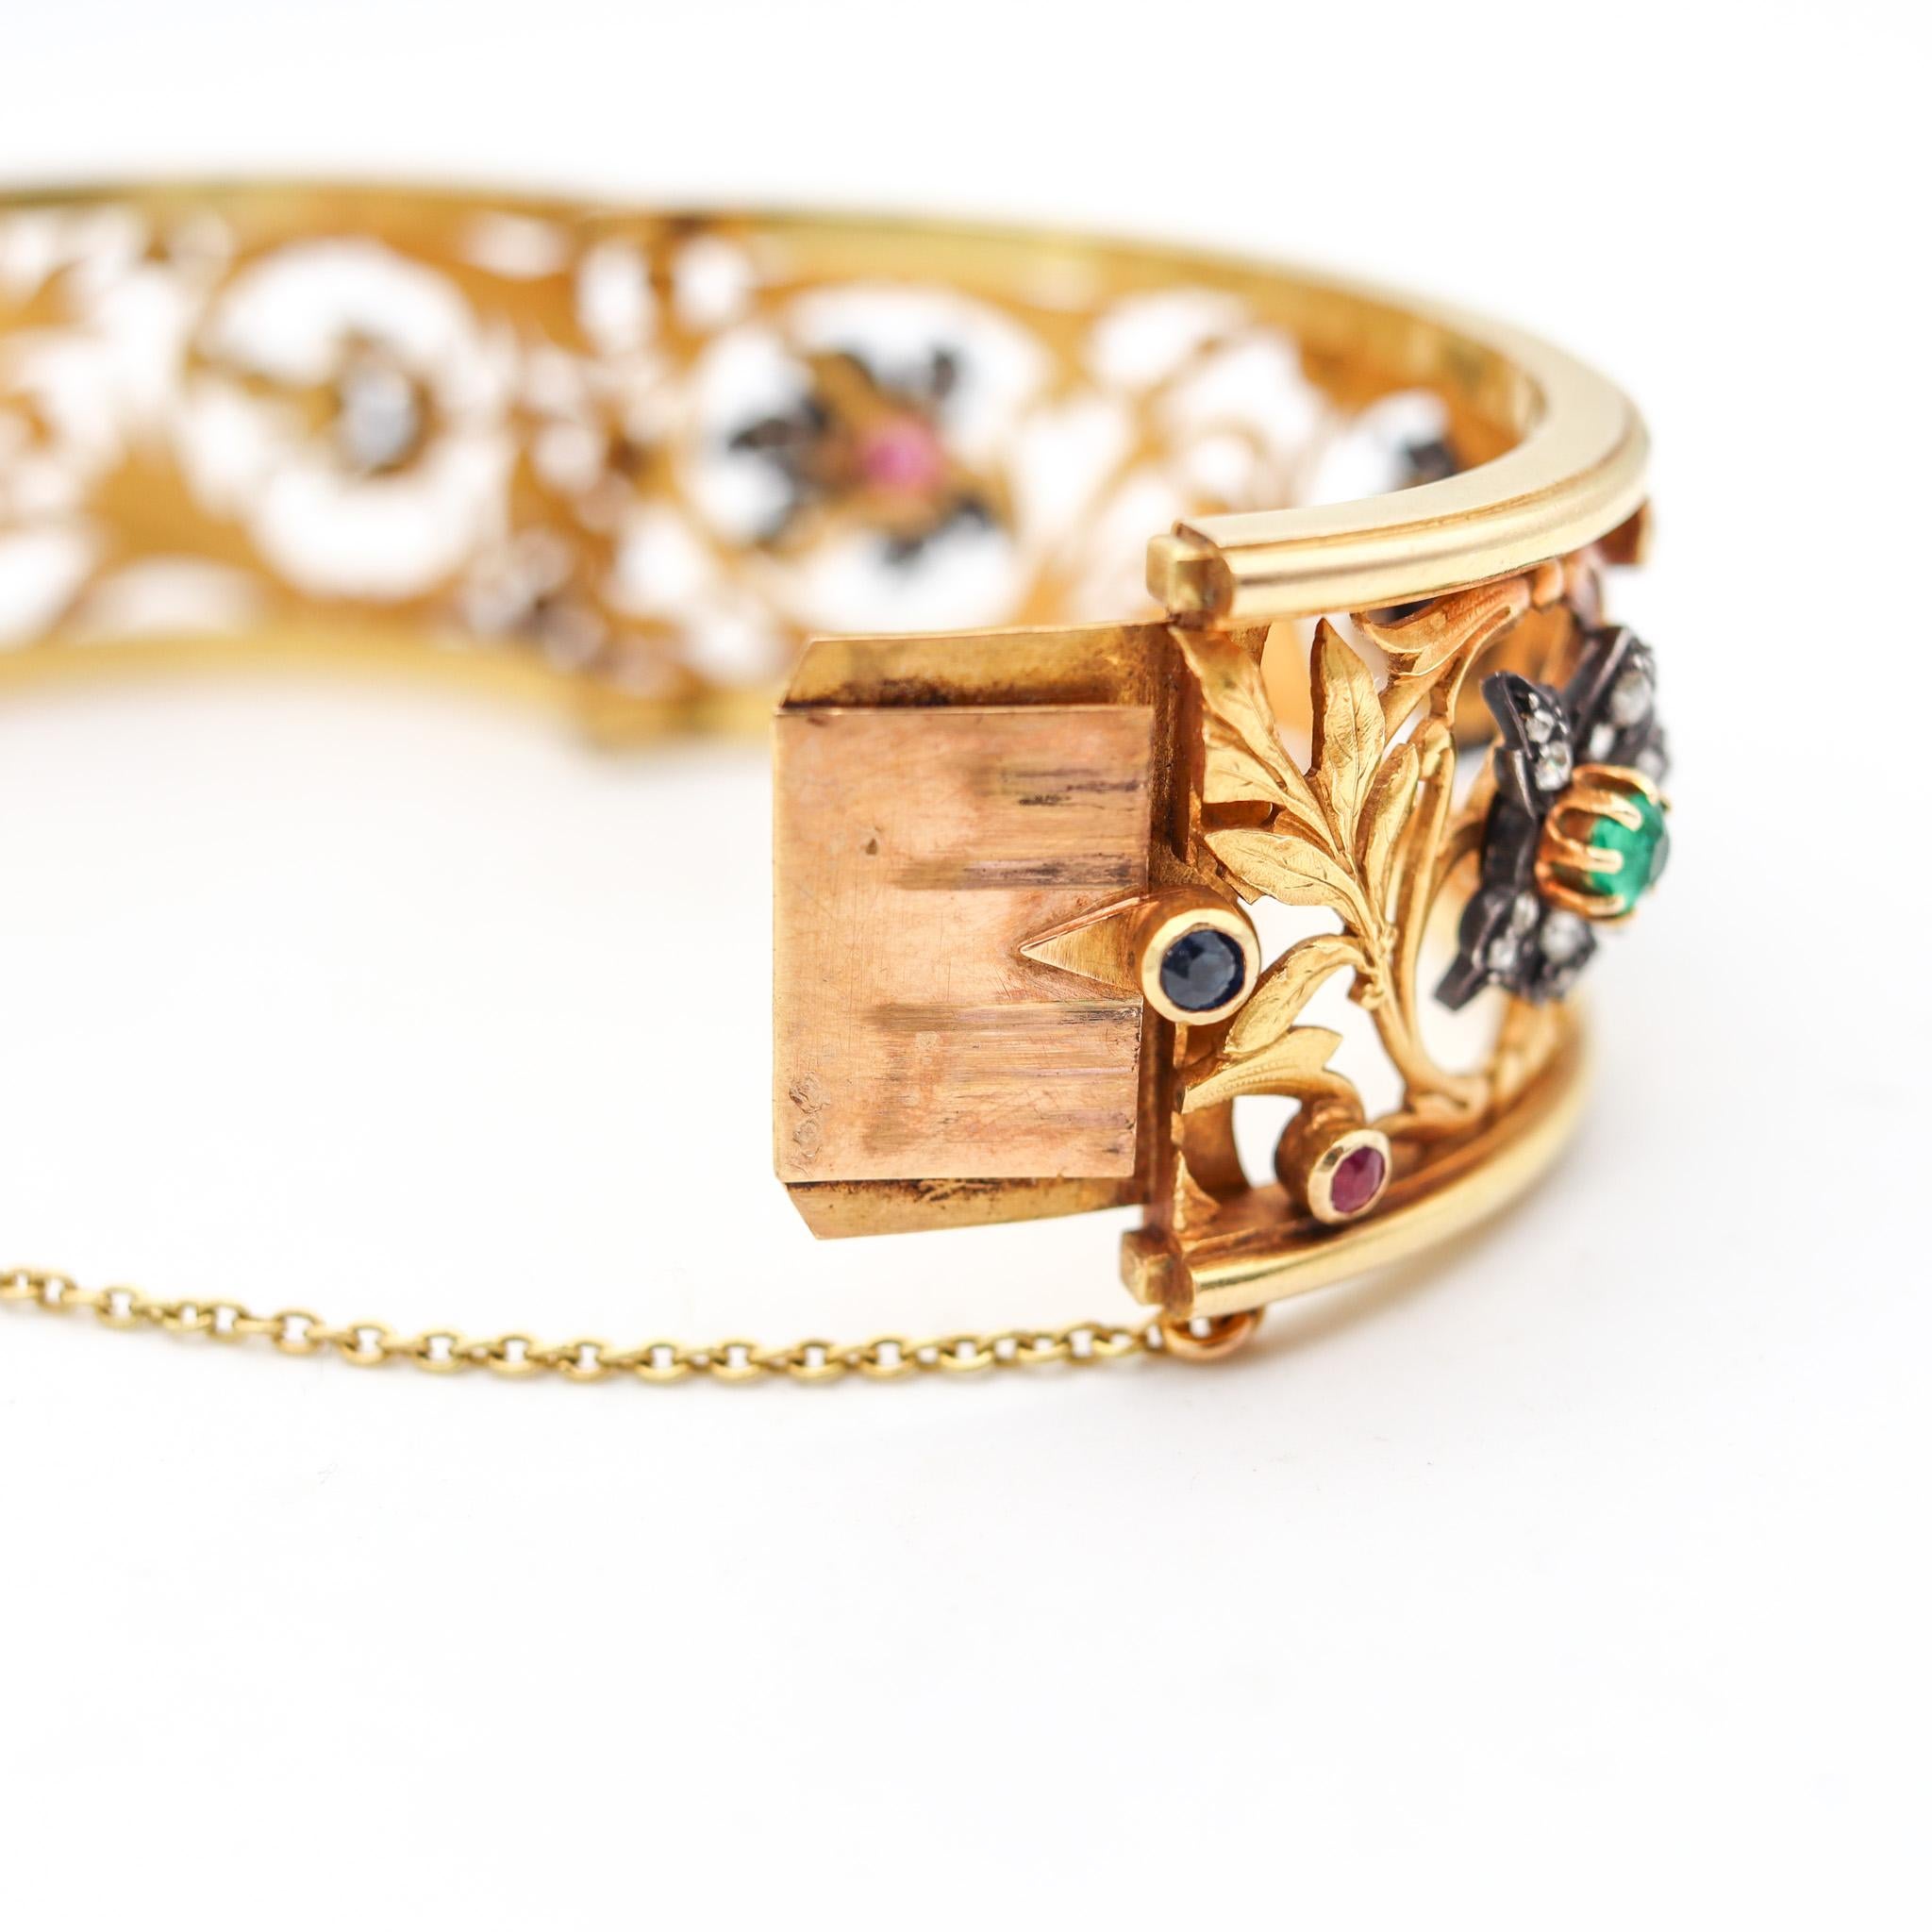 Women's French 1890 Art Nouveau Bangle Bracelet In 18Kt Yellow Gold With Gemstones For Sale